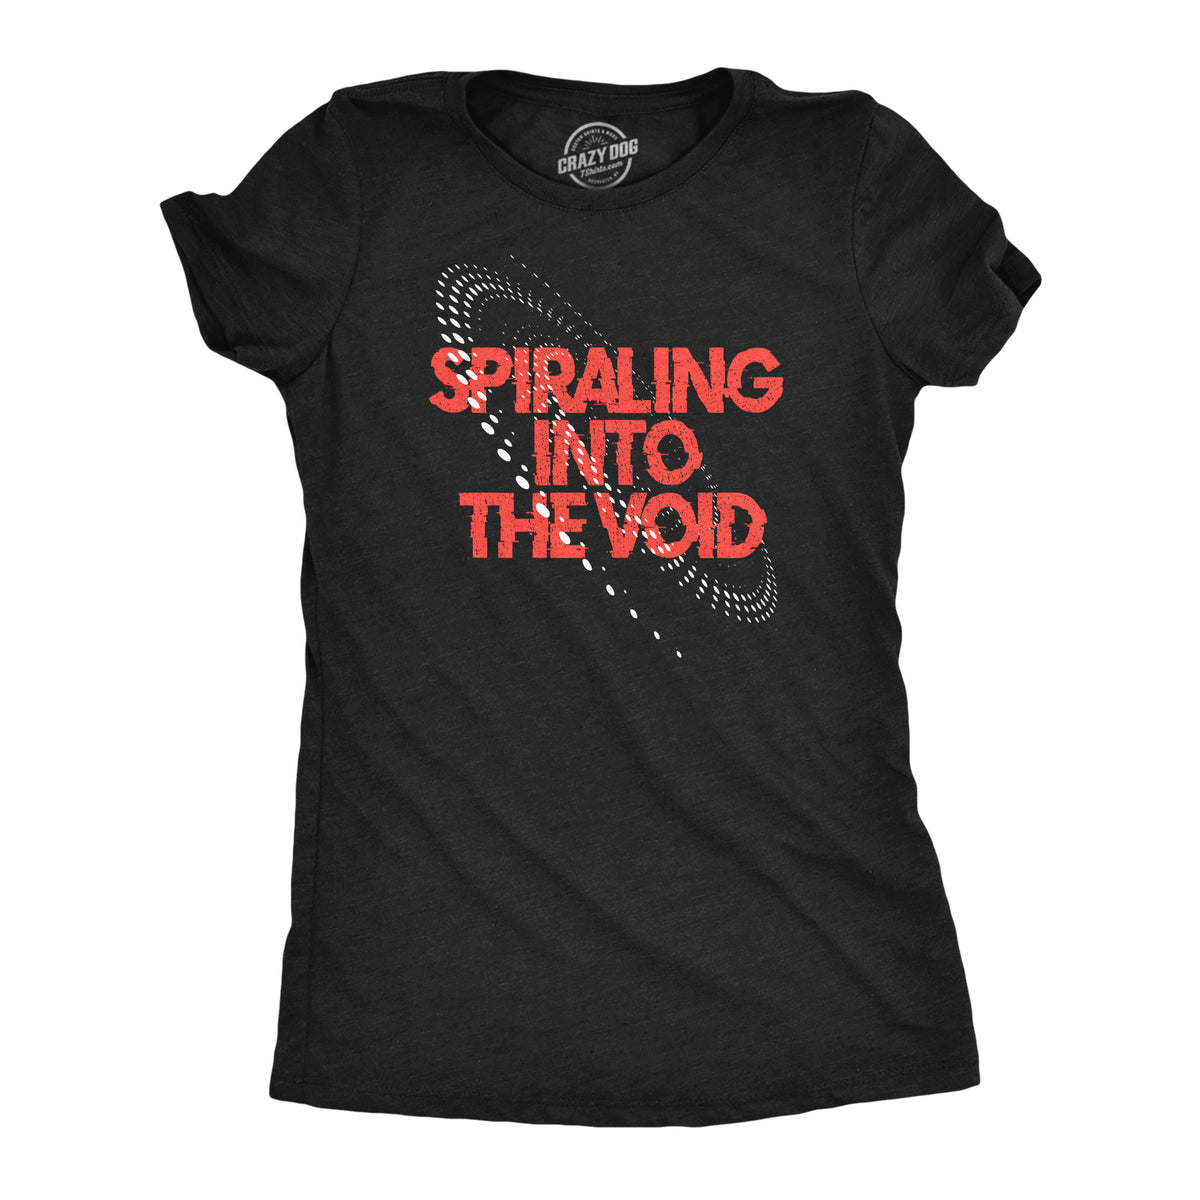 Funny Heather Black - VOID Spiraling Into The Void Womens T Shirt Nerdy sarcastic Tee